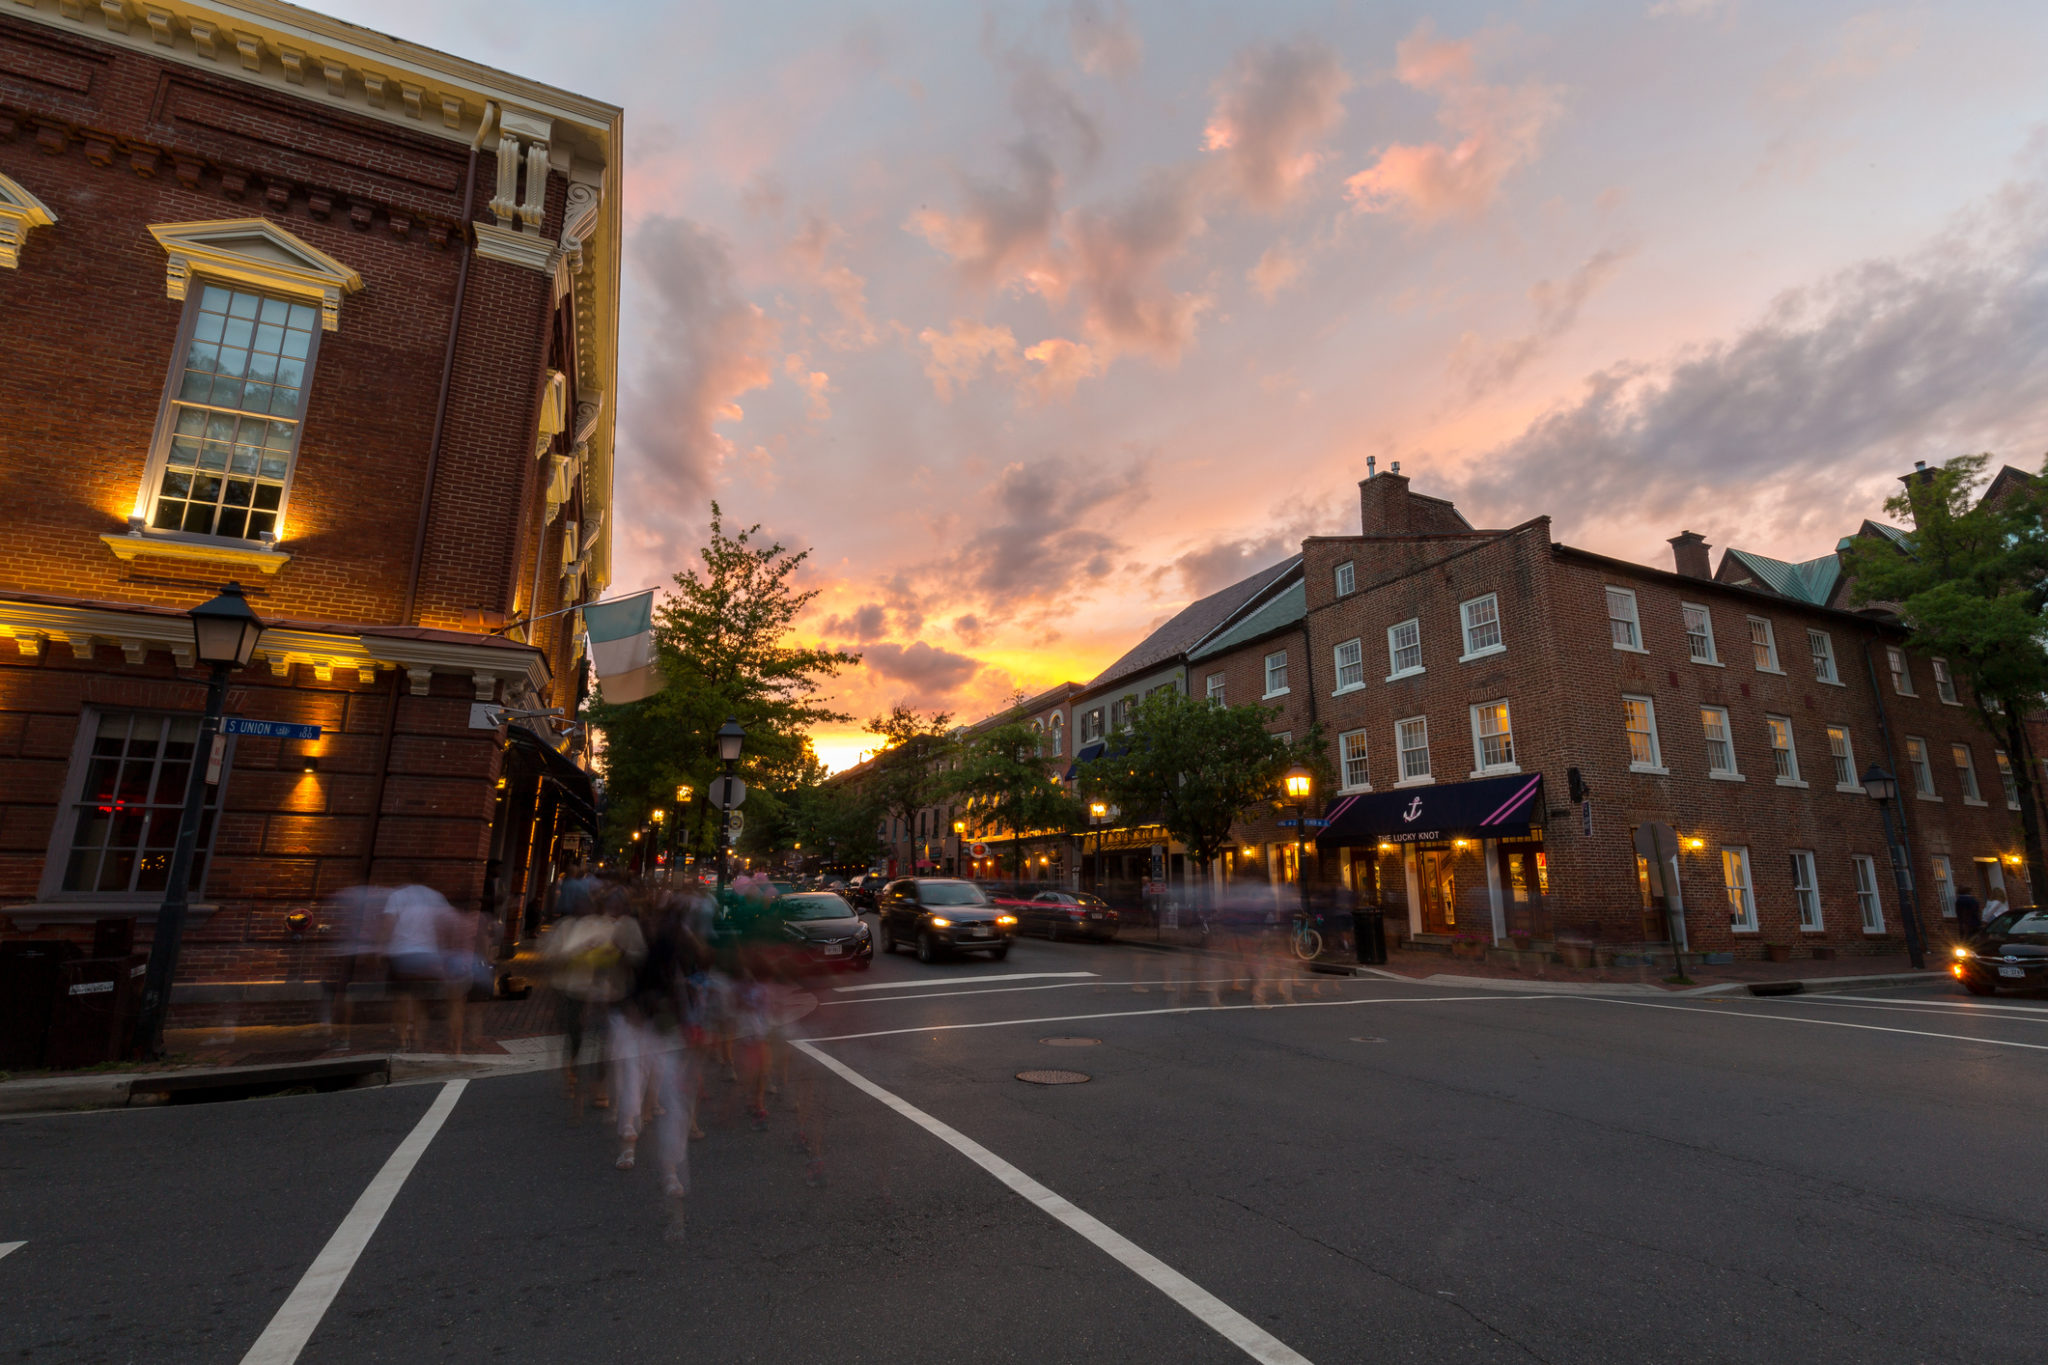 A CarFree Pedestrian Plaza in Old Town Alexandria Could Happen